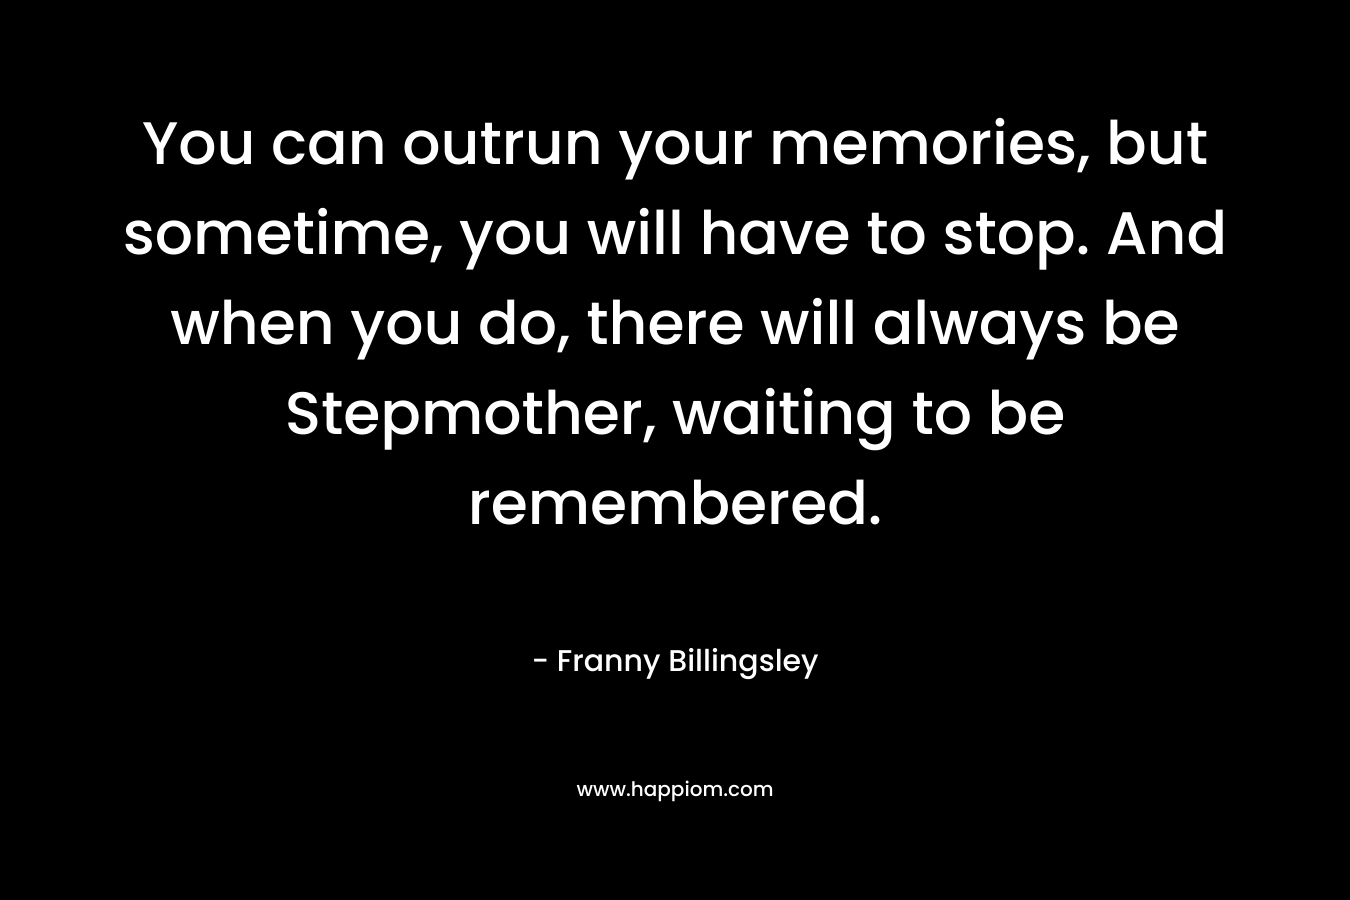 You can outrun your memories, but sometime, you will have to stop. And when you do, there will always be Stepmother, waiting to be remembered.